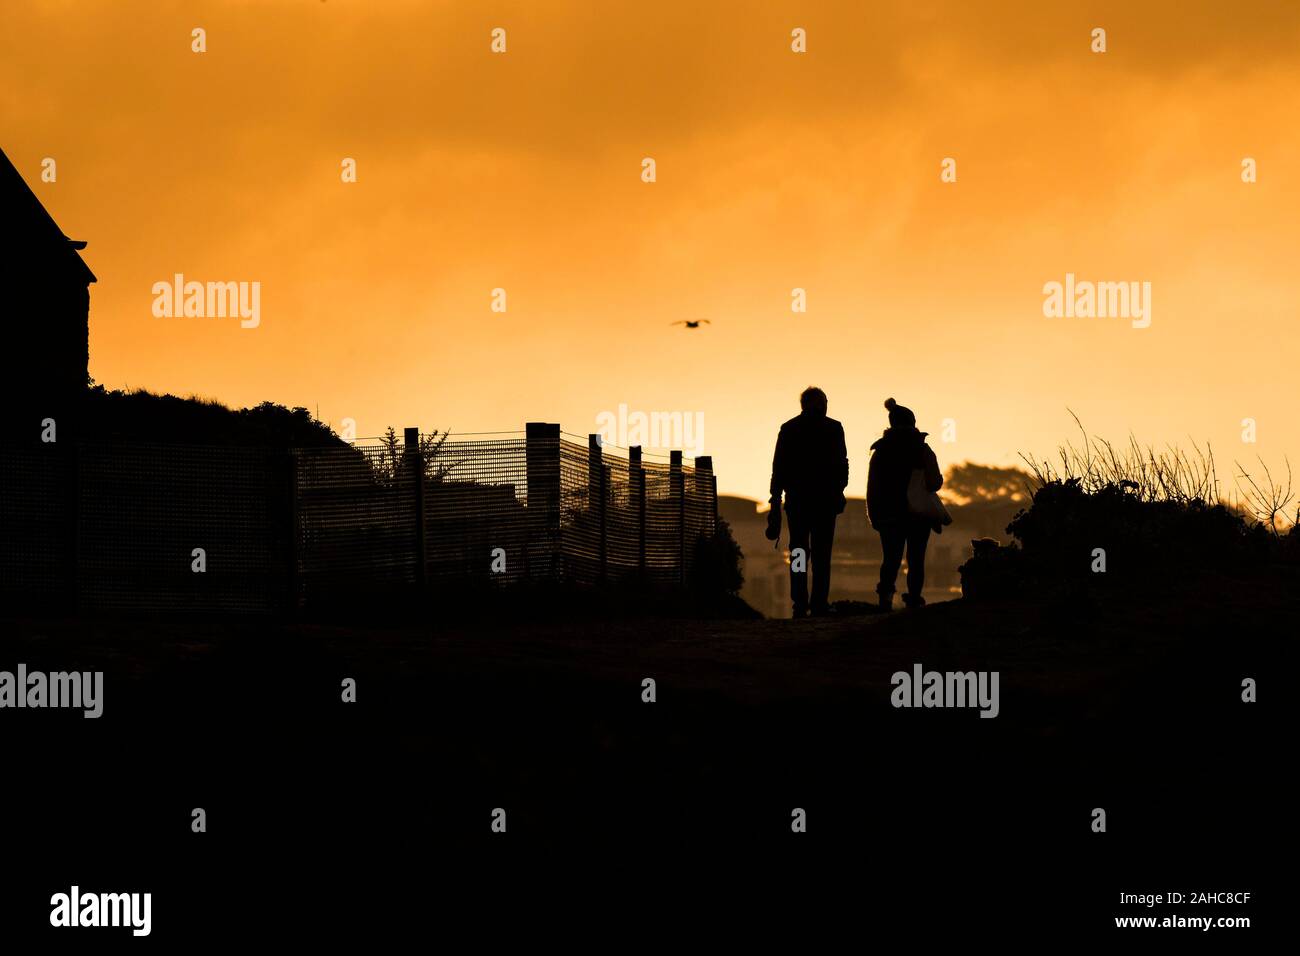 The silhouette of two people walking in evening light; Stock Photo